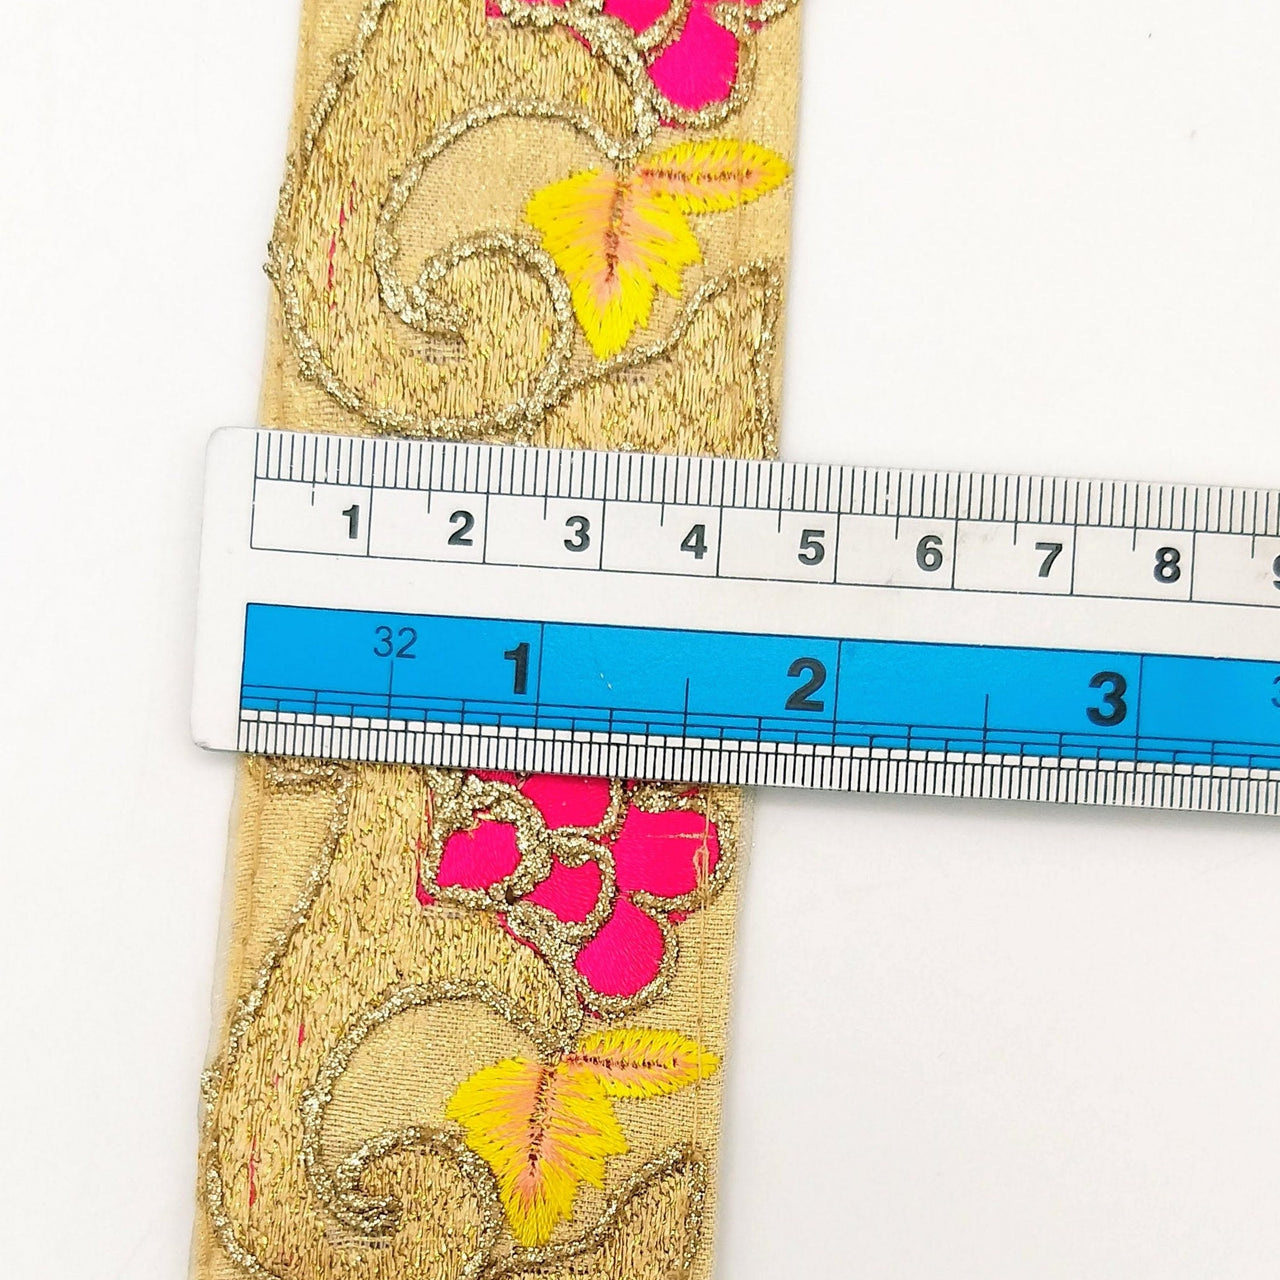 Beige Art Silk Fabric Trim with Floral Embroidery in Yellow, Gold and Fuchsia, Flower Embroidered Trim